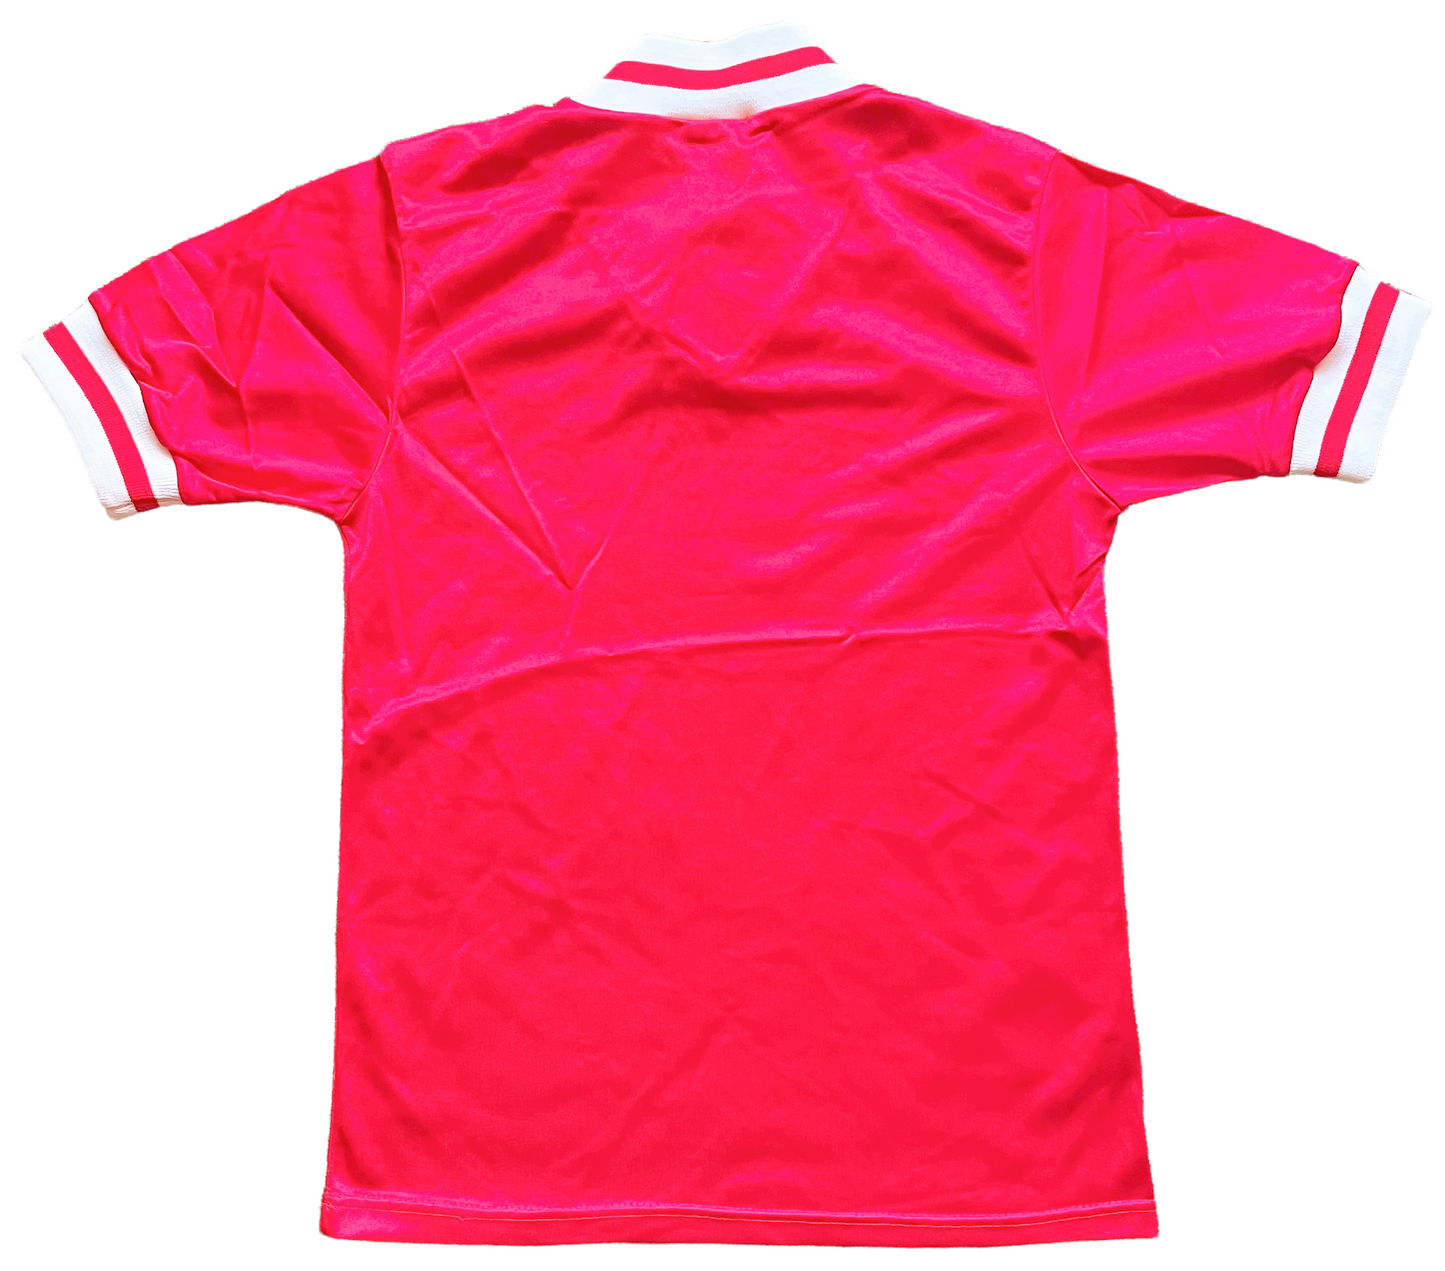 Liverpool 1984 Home Shirt (excellent) no size, 8 to 10 years? Height 18 inches